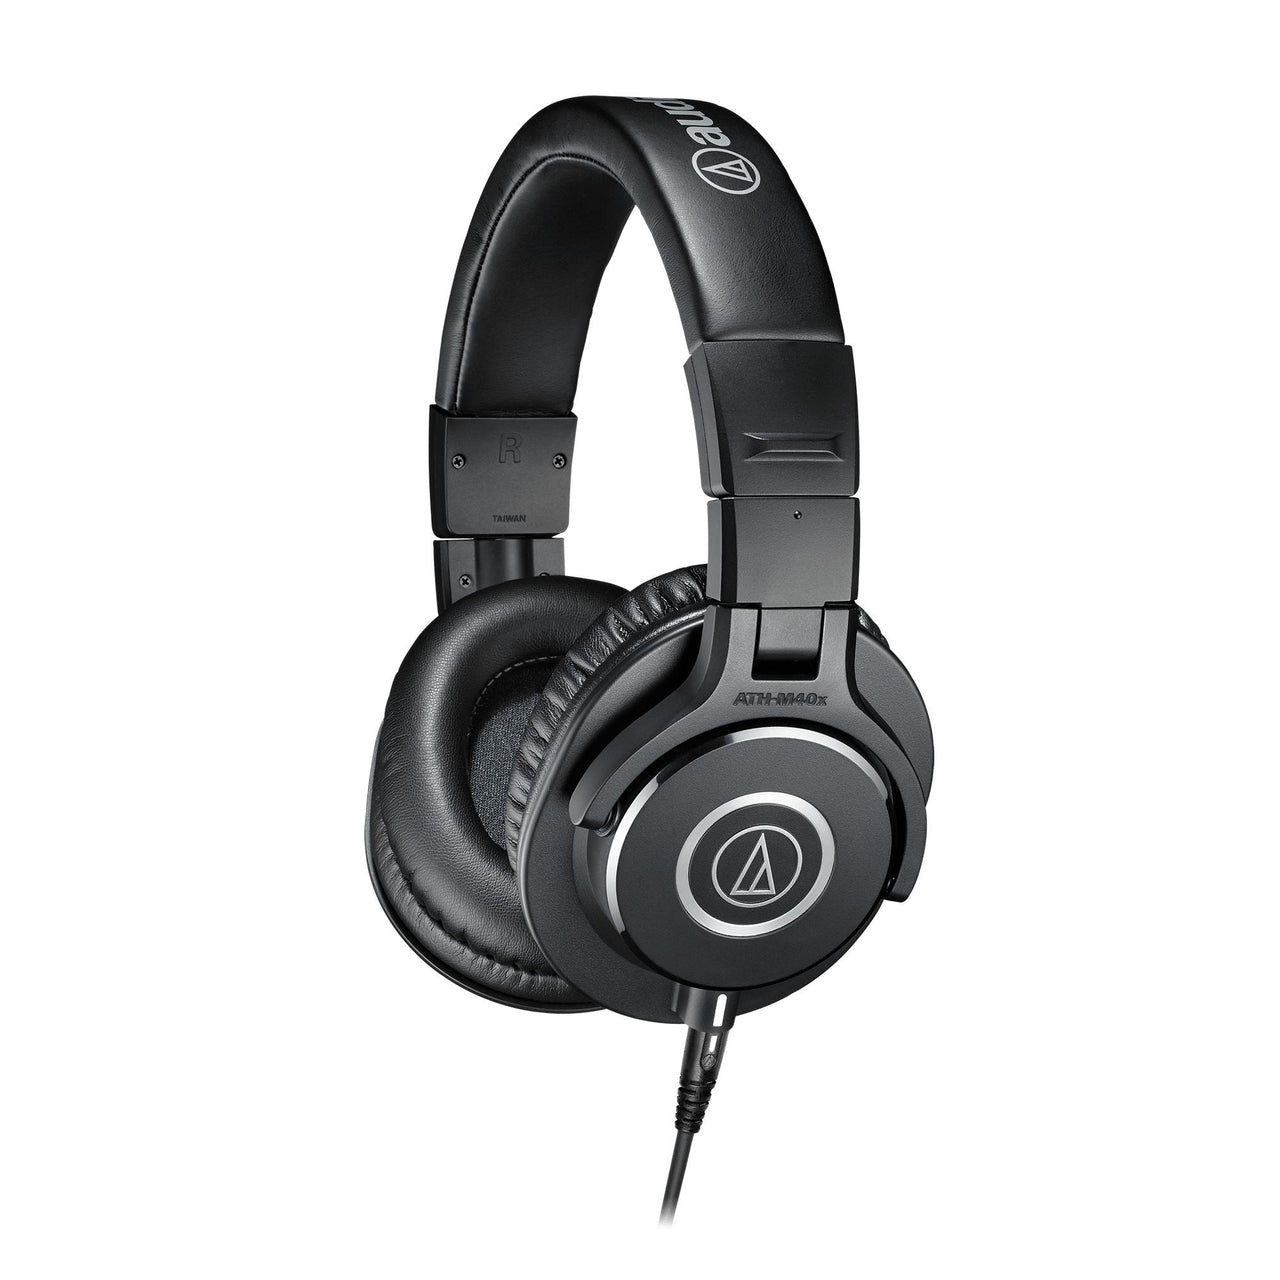 Audifonos Audiotechnica Profesionales Dinamicos Monitor, Ath-m40x